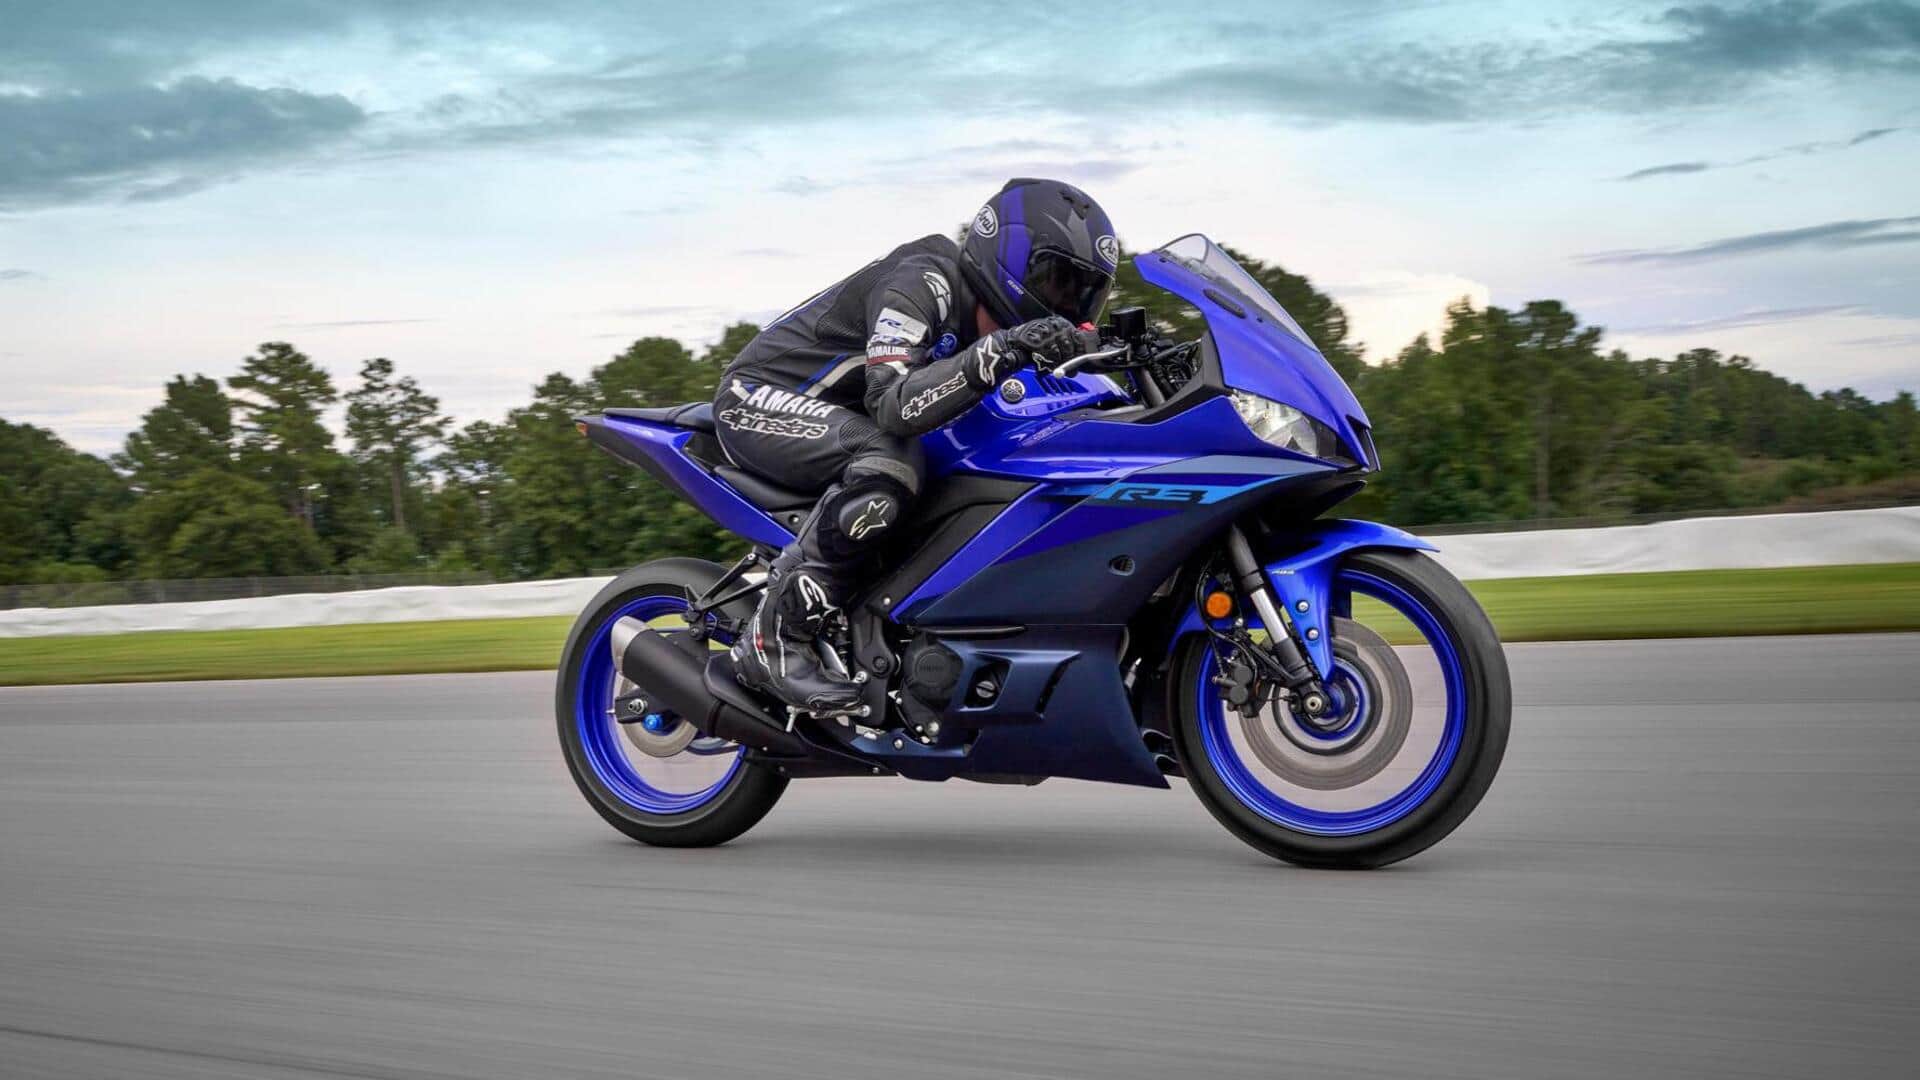 Yamaha R3 goes official in India at Rs. 4.64 lakh